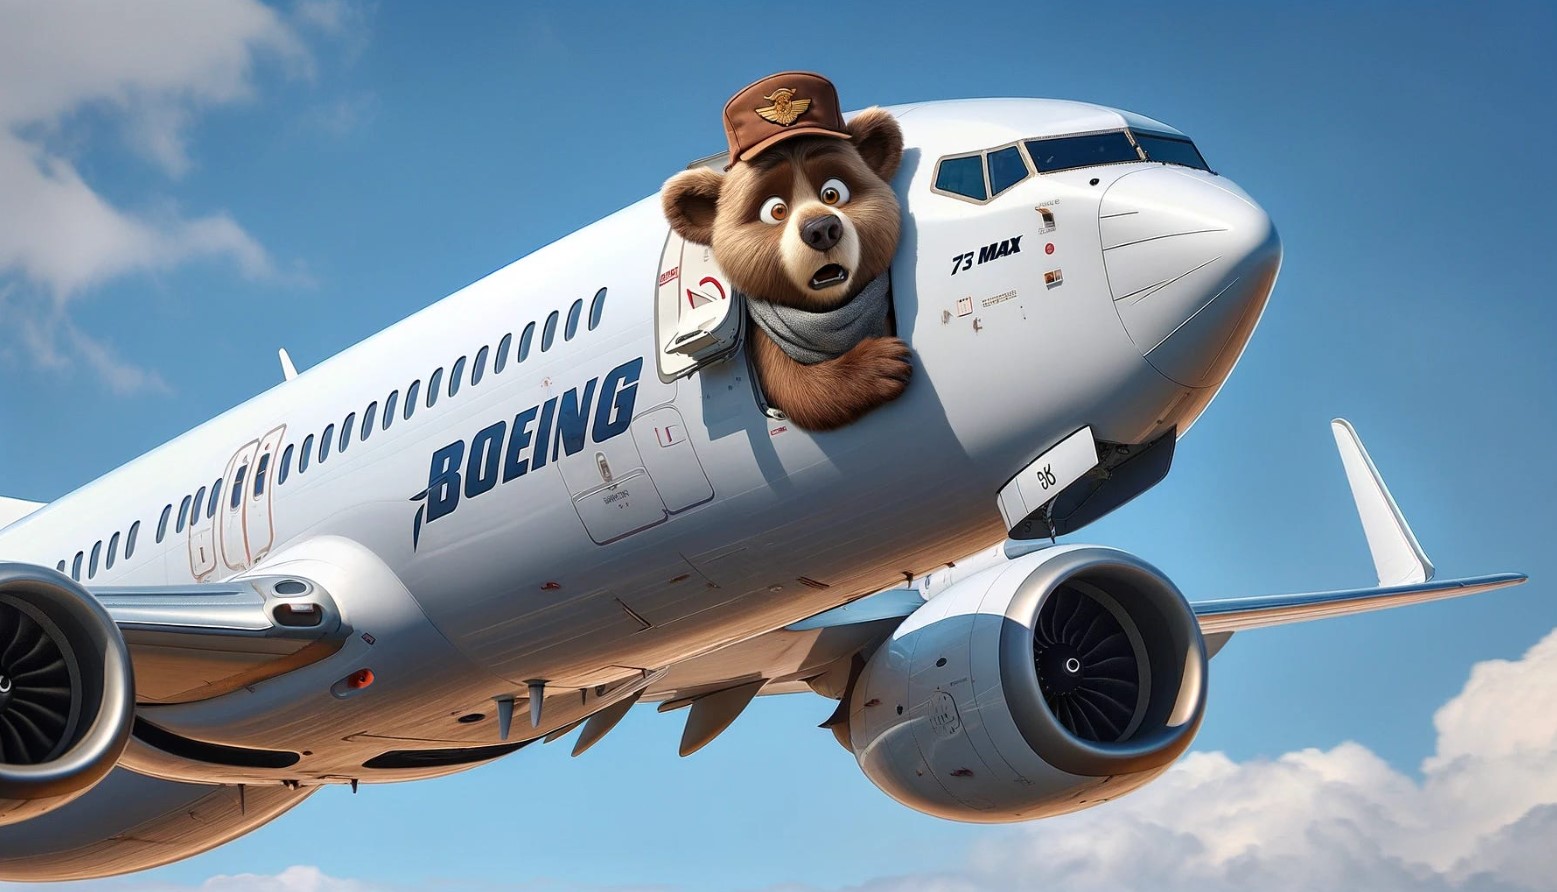 A bear surprised to find an open door on a Boeing 737 Max in mid air. 